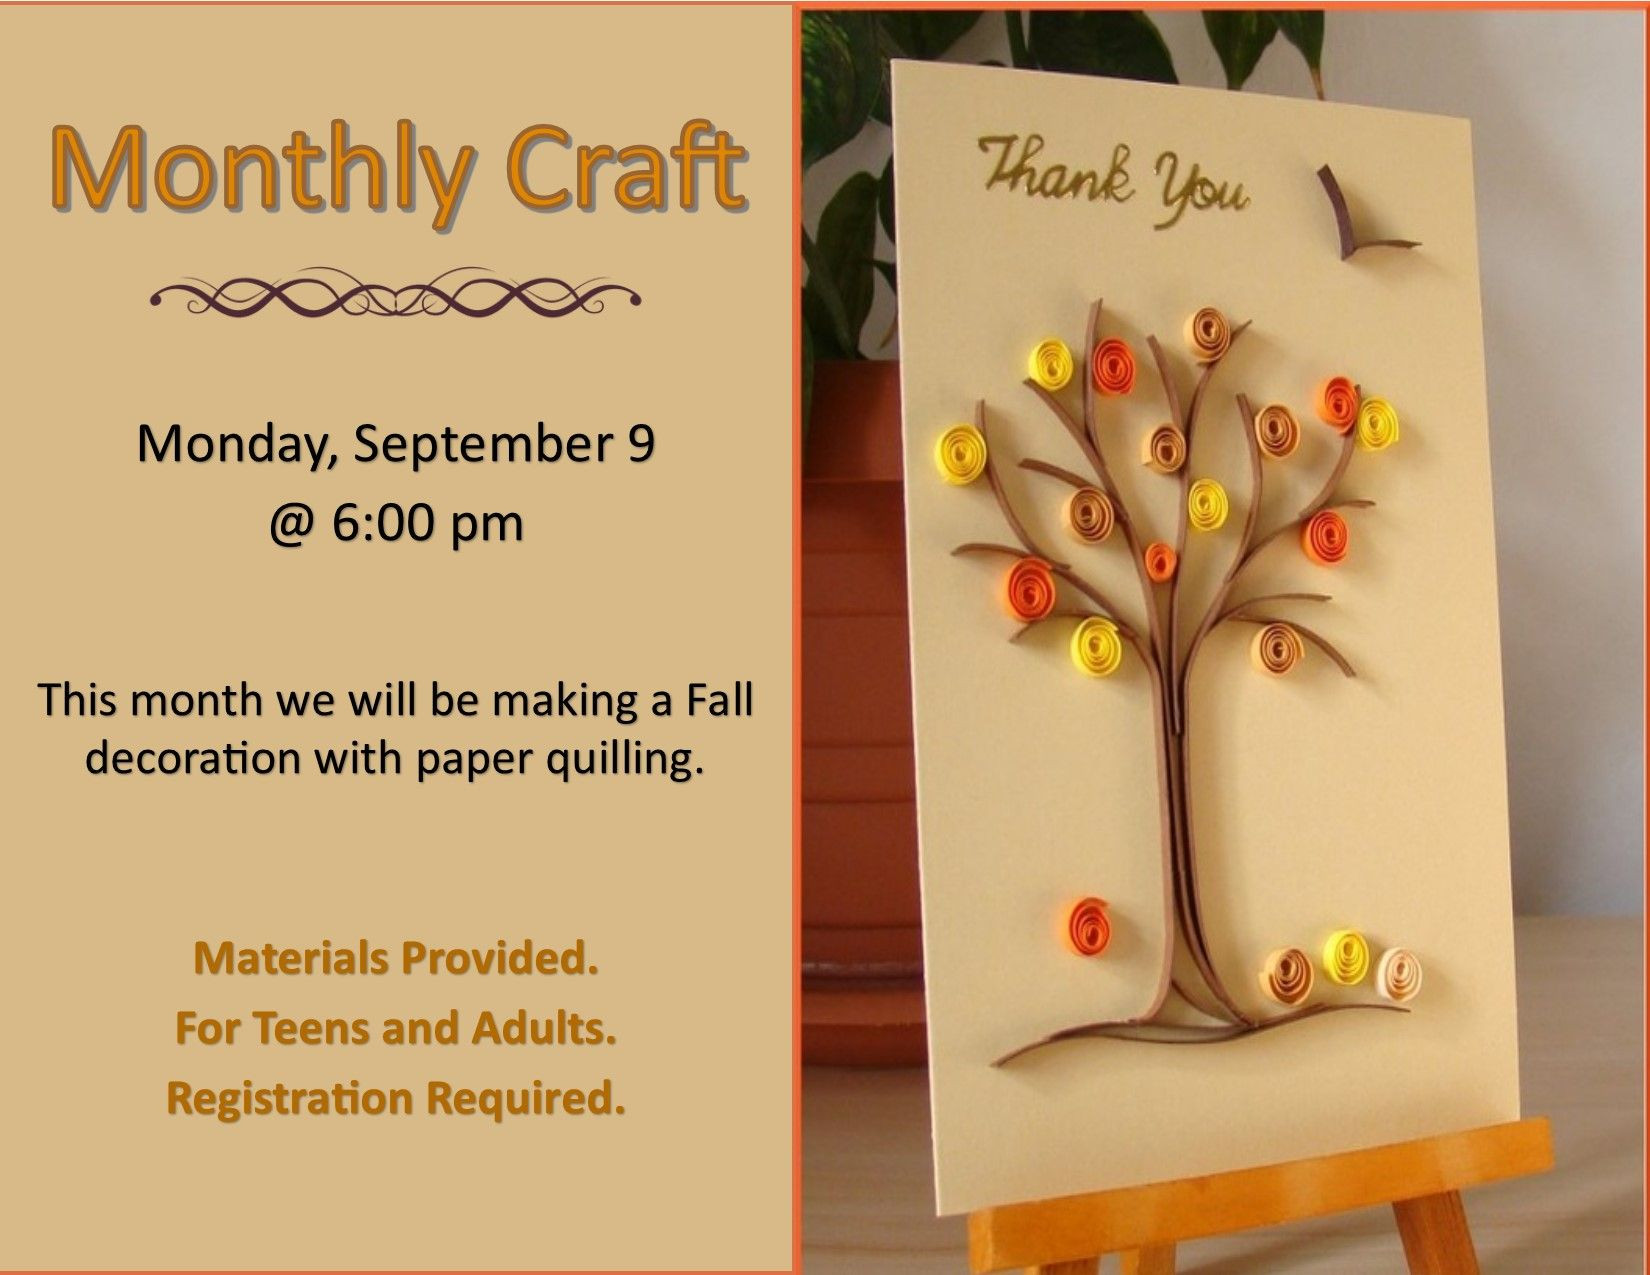 September Themes For Adults
 The Adult Monthly Craft will be paper quilling with a fall